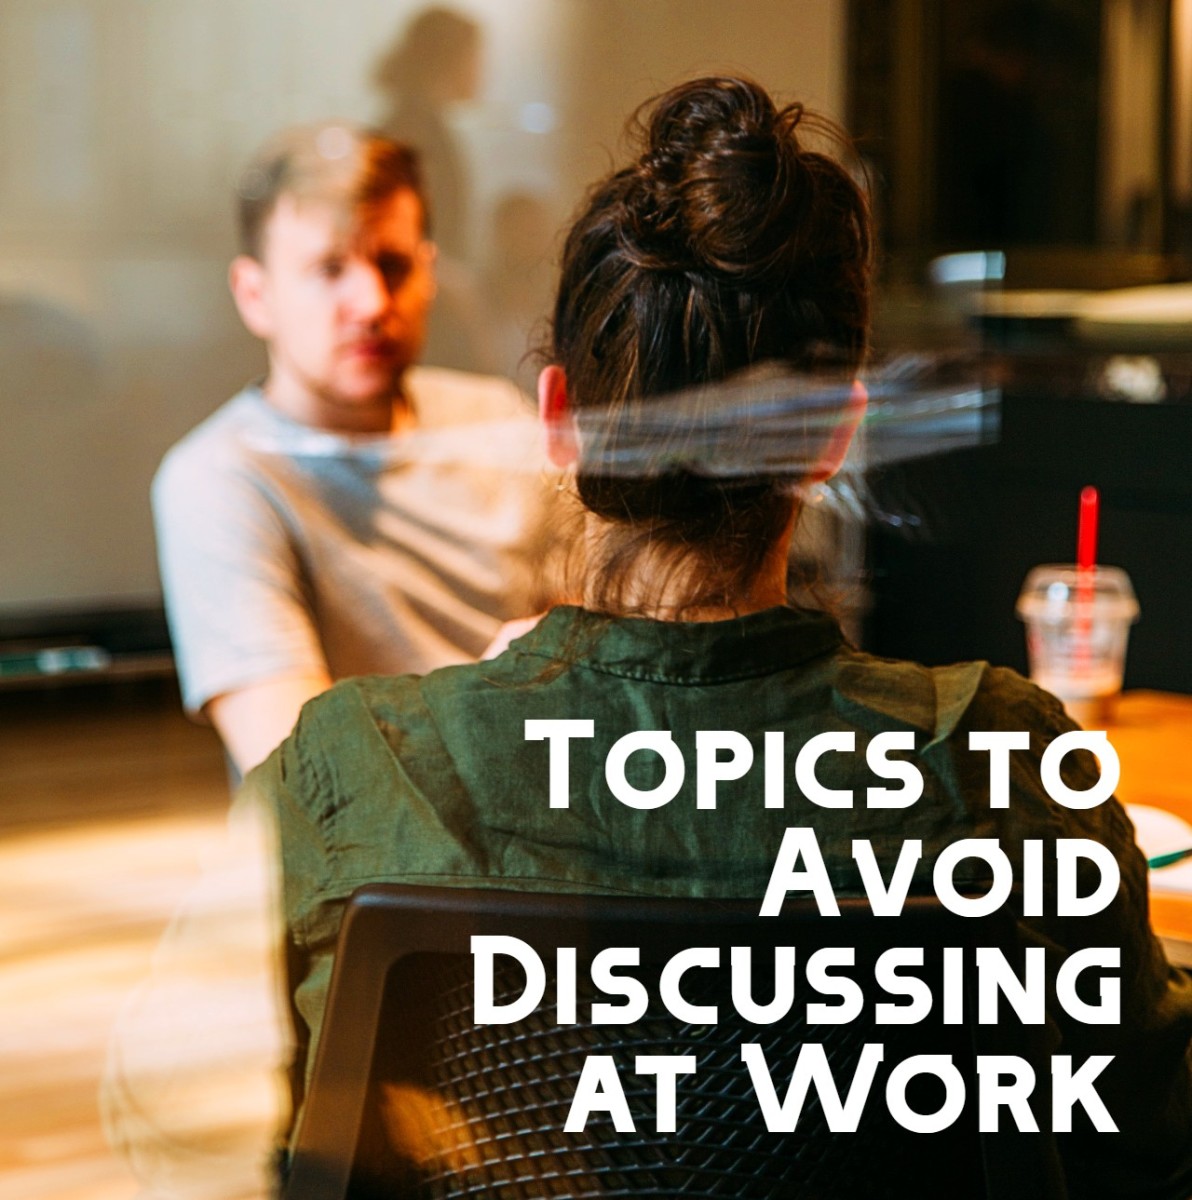 7 Topics to Avoid Discussing at Work